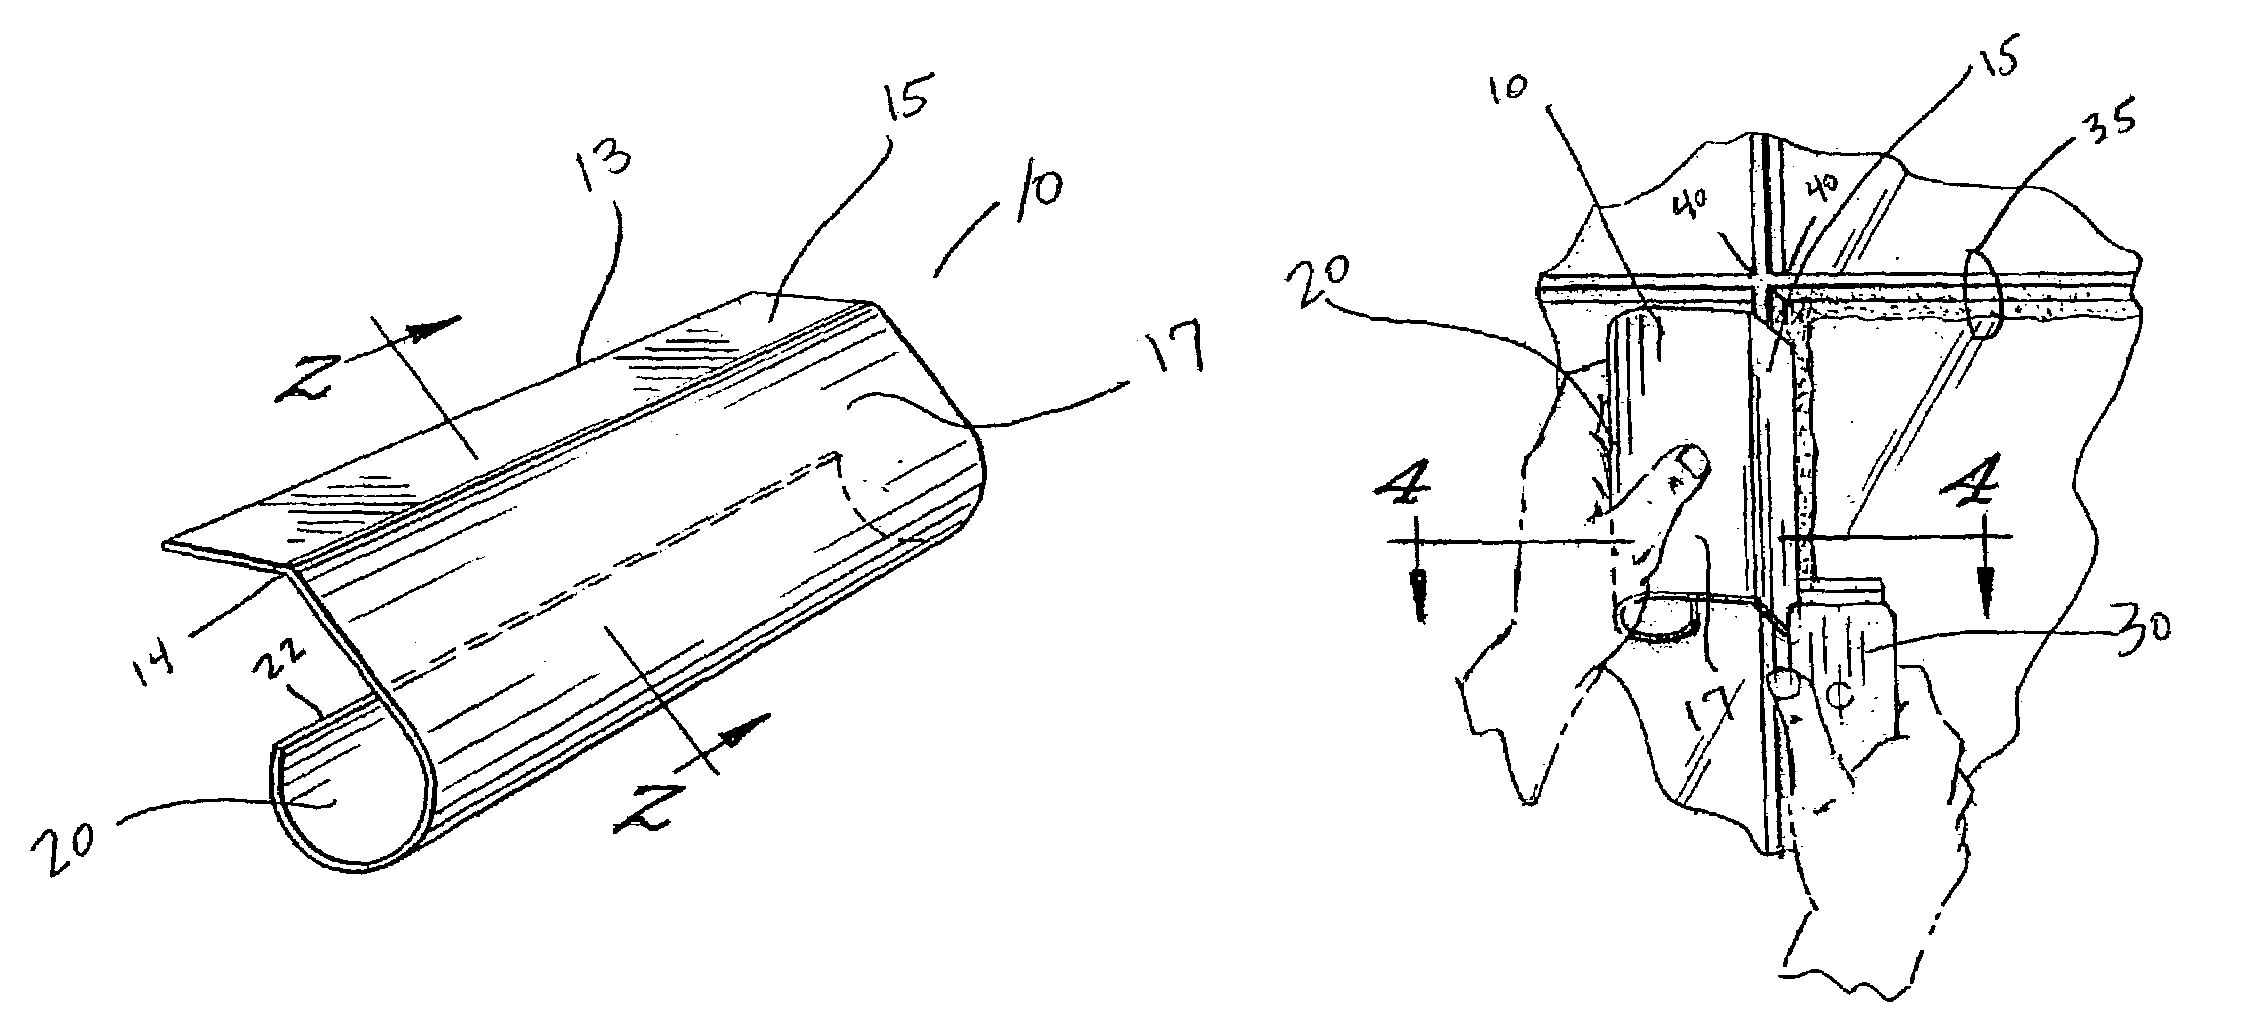 Ergonomic shielding tool for processing a surface